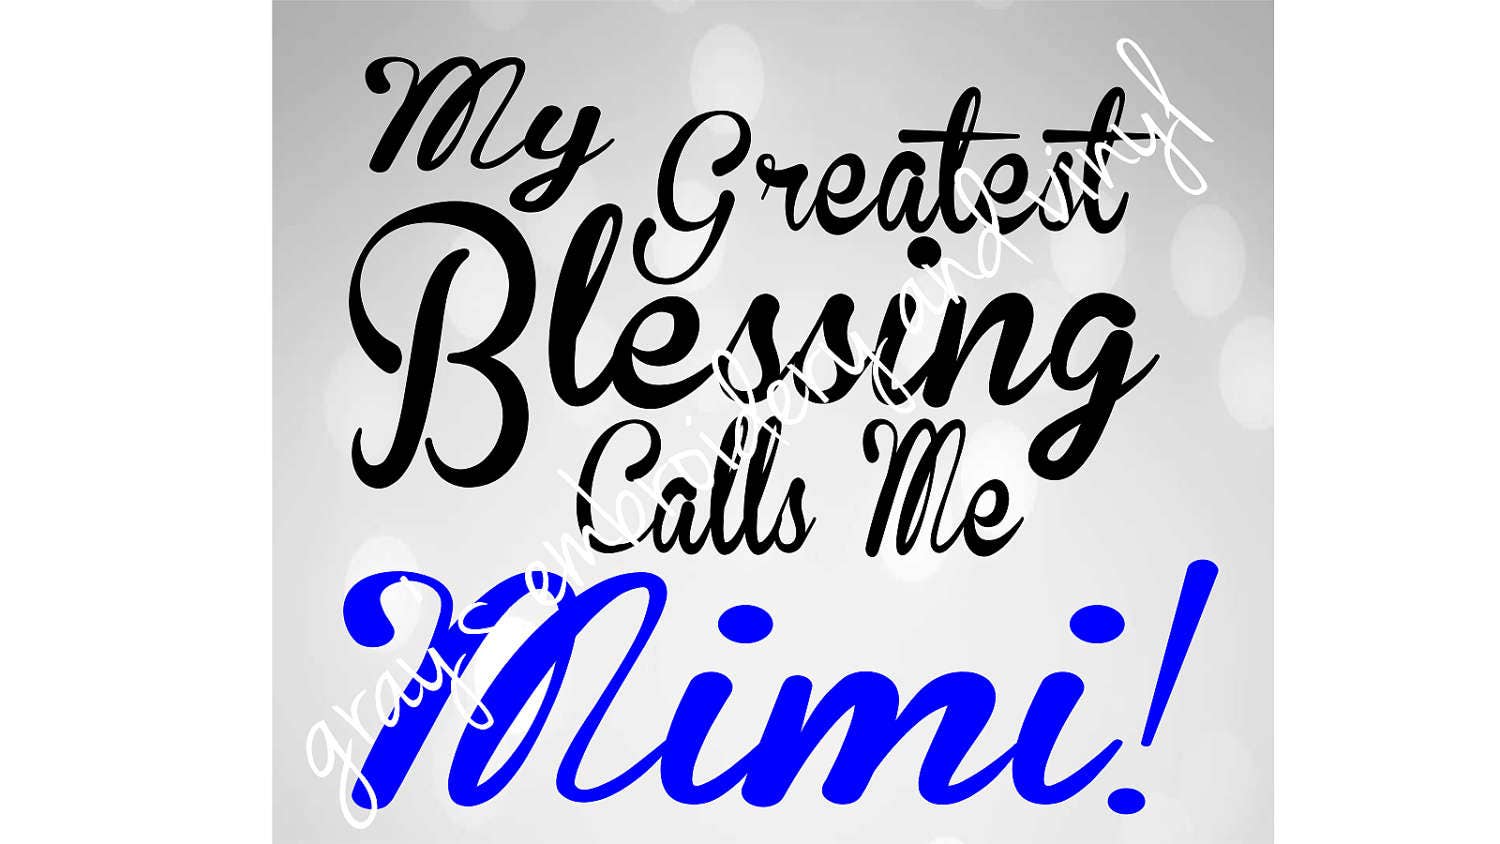 Blessed to be Called Mimi. Mimi me